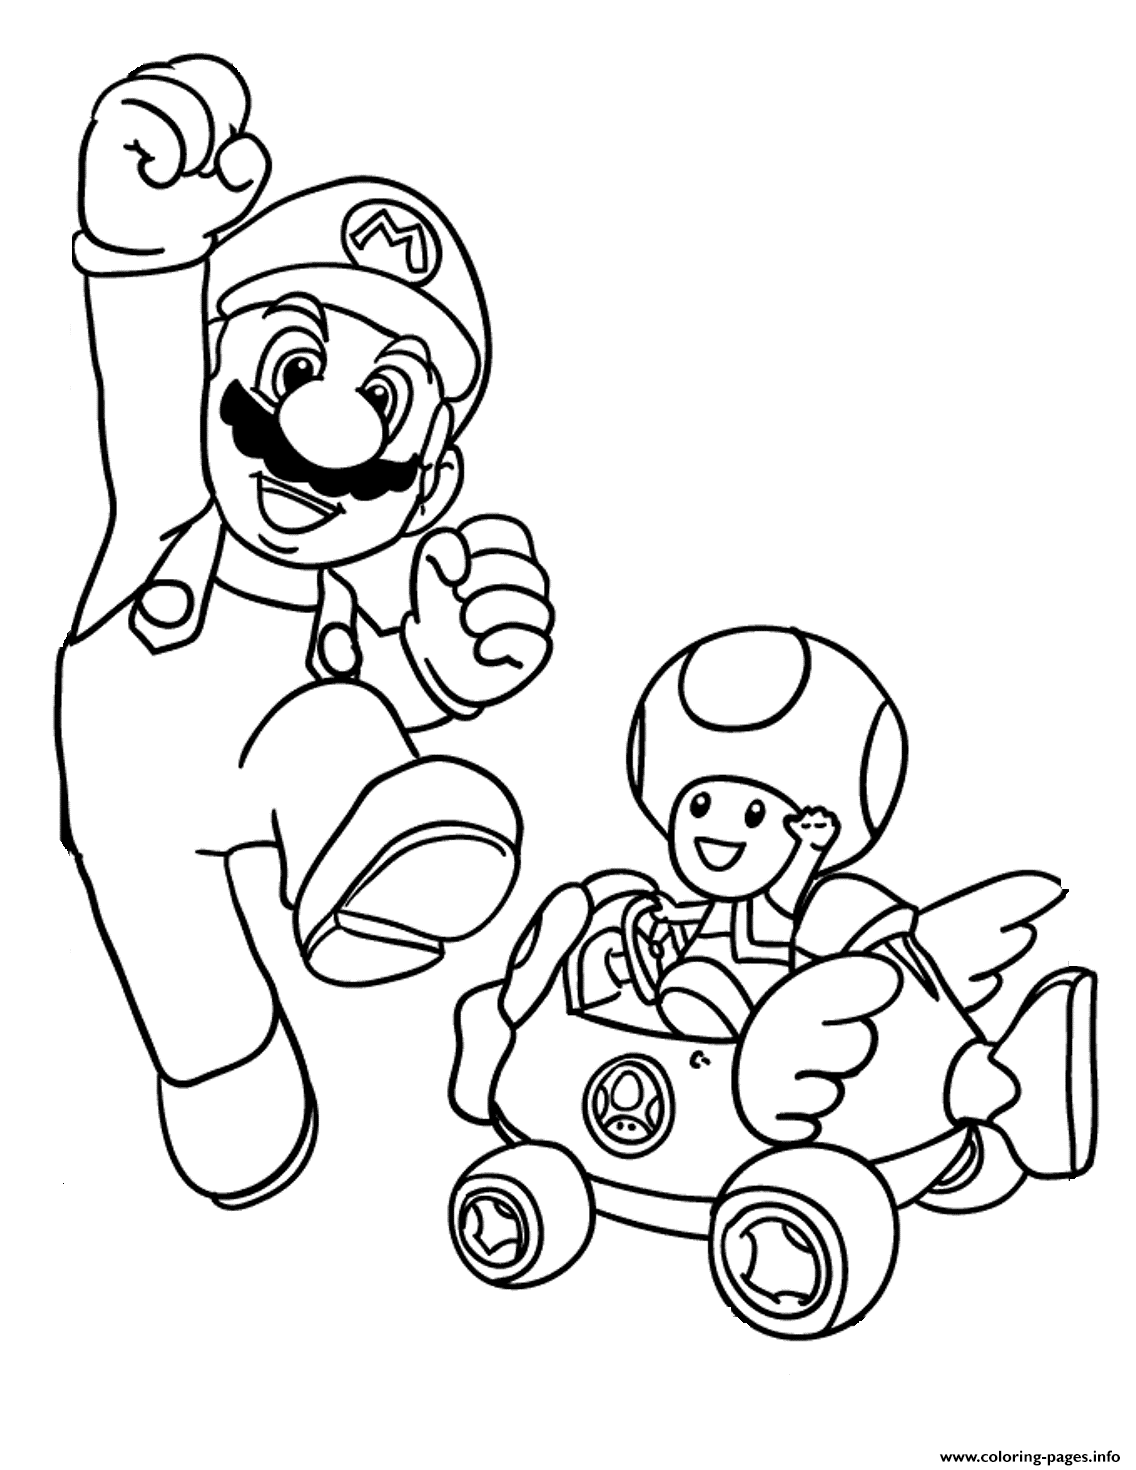 Print mushroom and mario bros s3679 Coloring pages